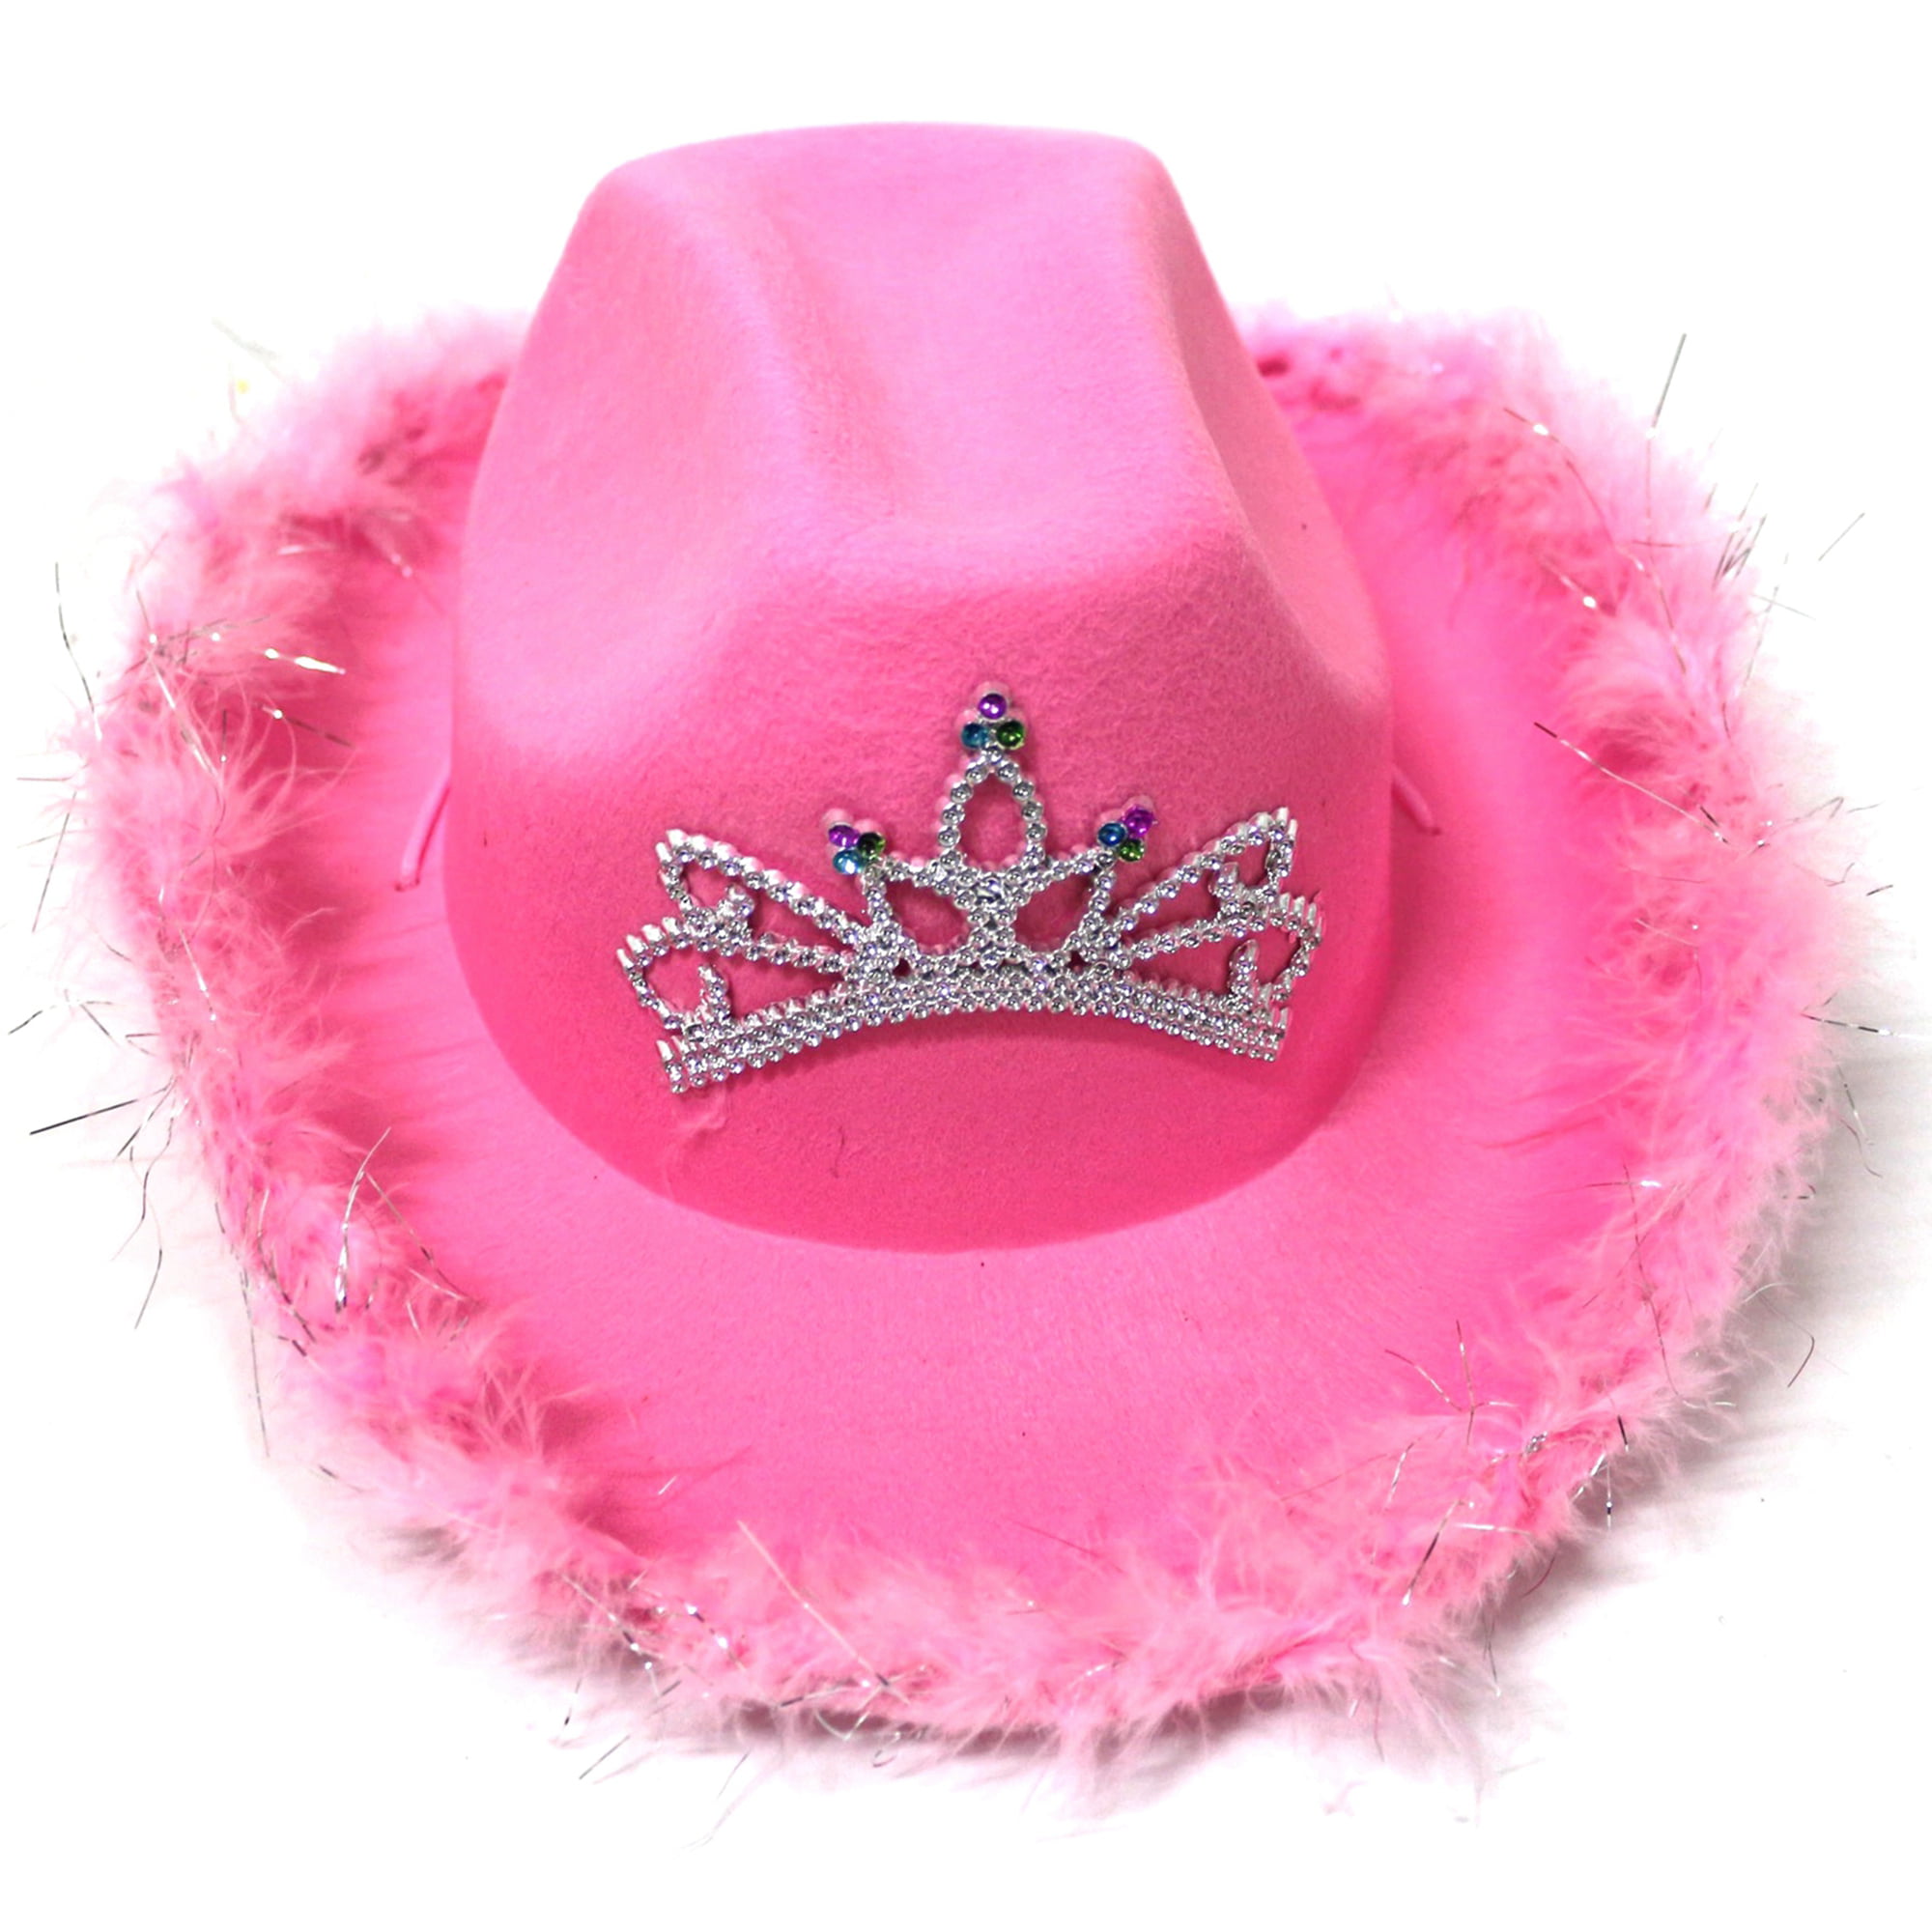 Fun Shiny Cowgirl Costume Accessory Sparkly Cowgirl Hat with Sequins and a Dazzling LED Tiara ArtCreativity Light-Up Pink Cowboy Hat for Girls Cute Cowgirl Birthday Party Hat for Girls 